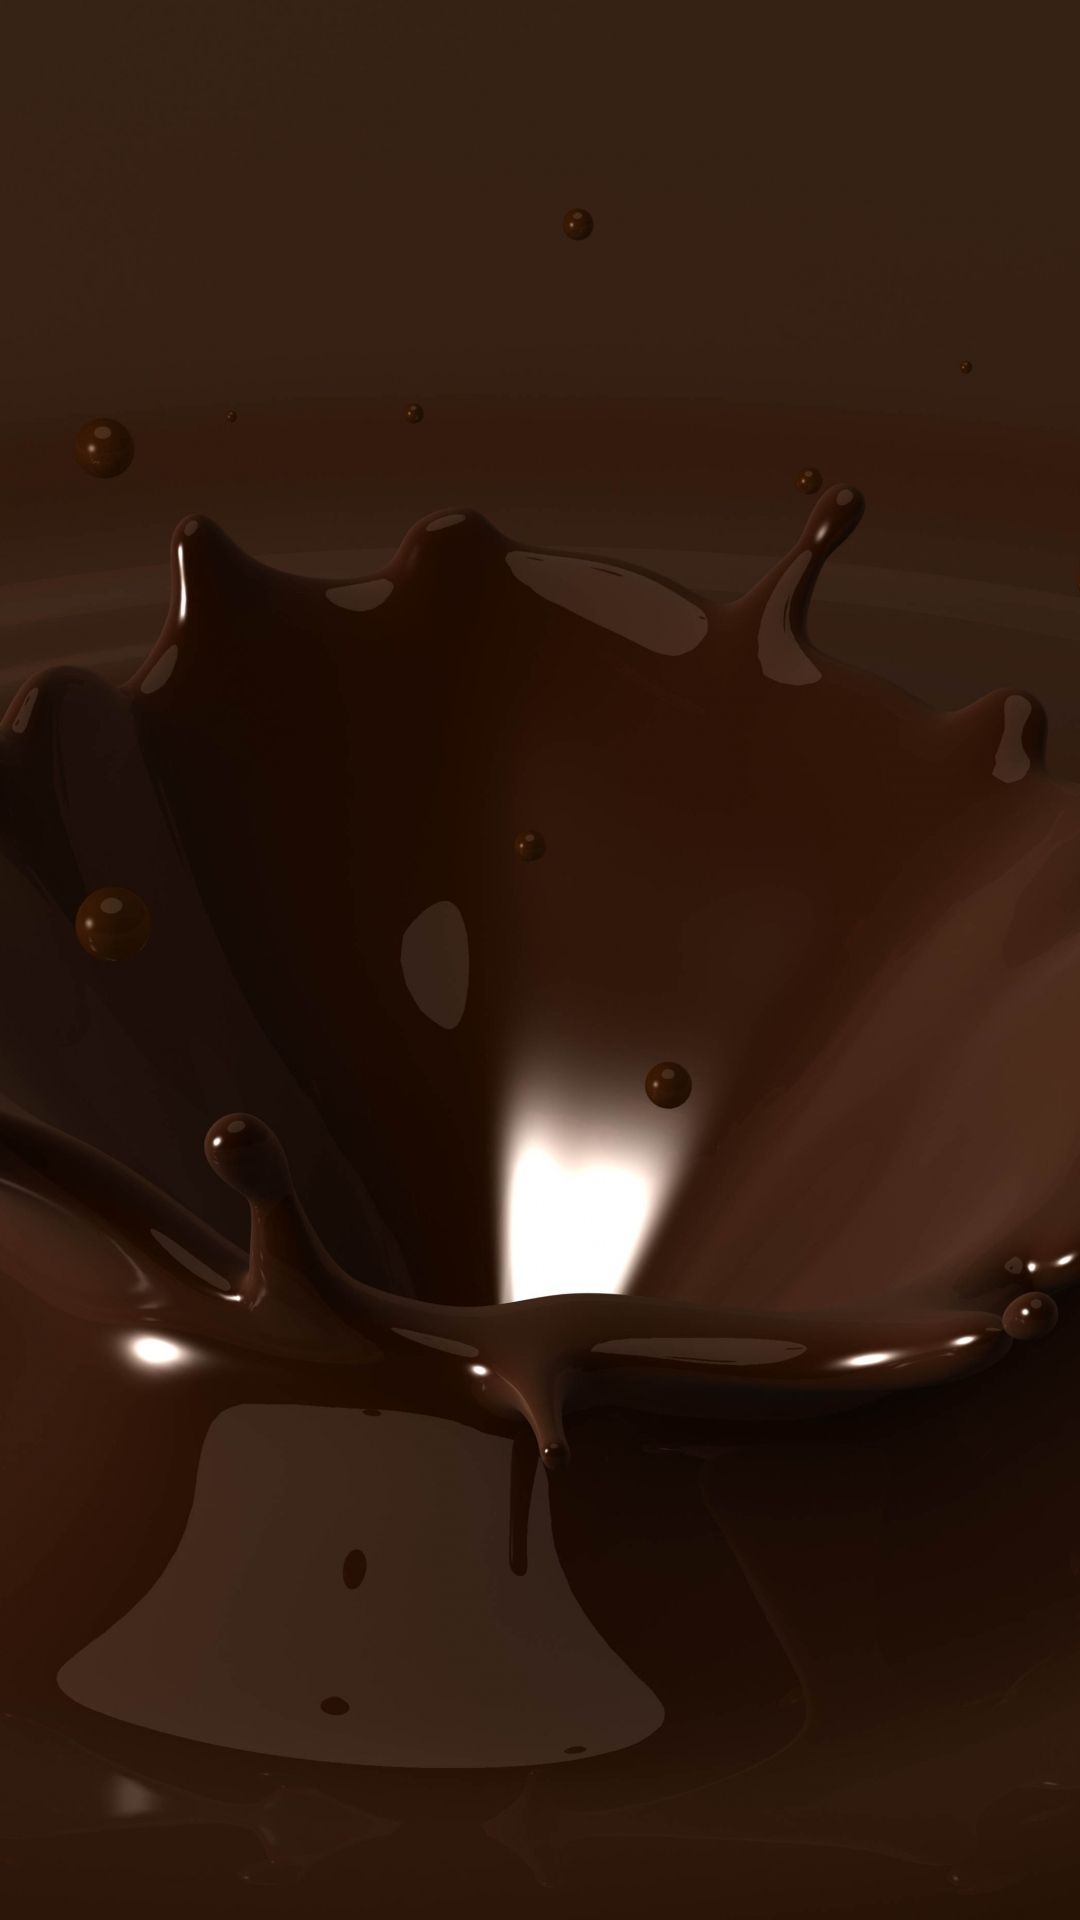 chocolate to see more cool original wallpaper! - Chocolate, Chocolate shots, Brown aesthetic